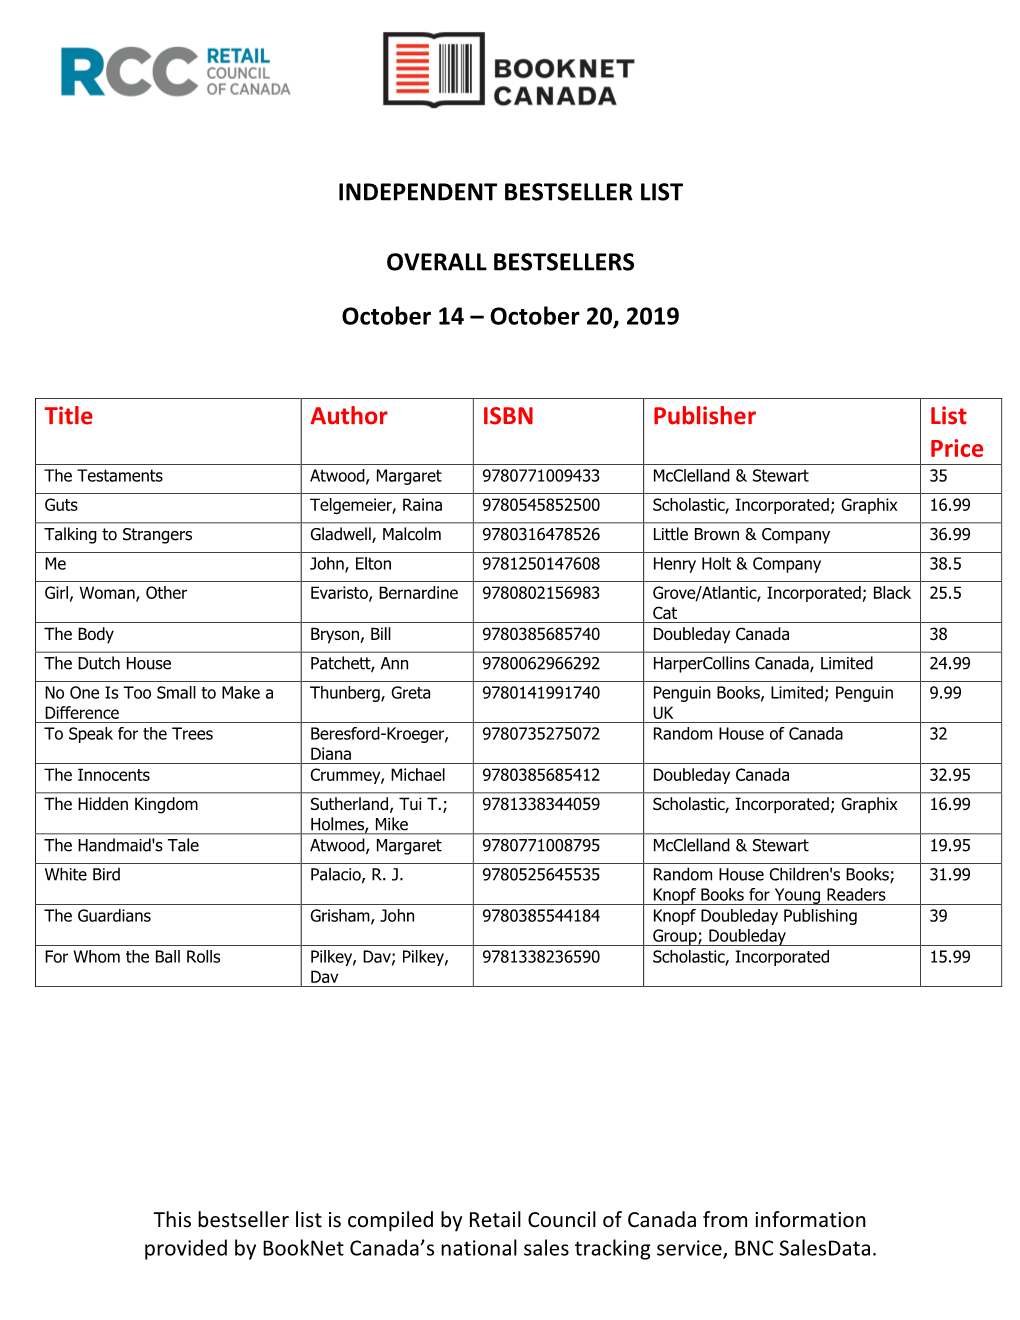 October 20, 2019 Title Author ISBN Publisher List Price